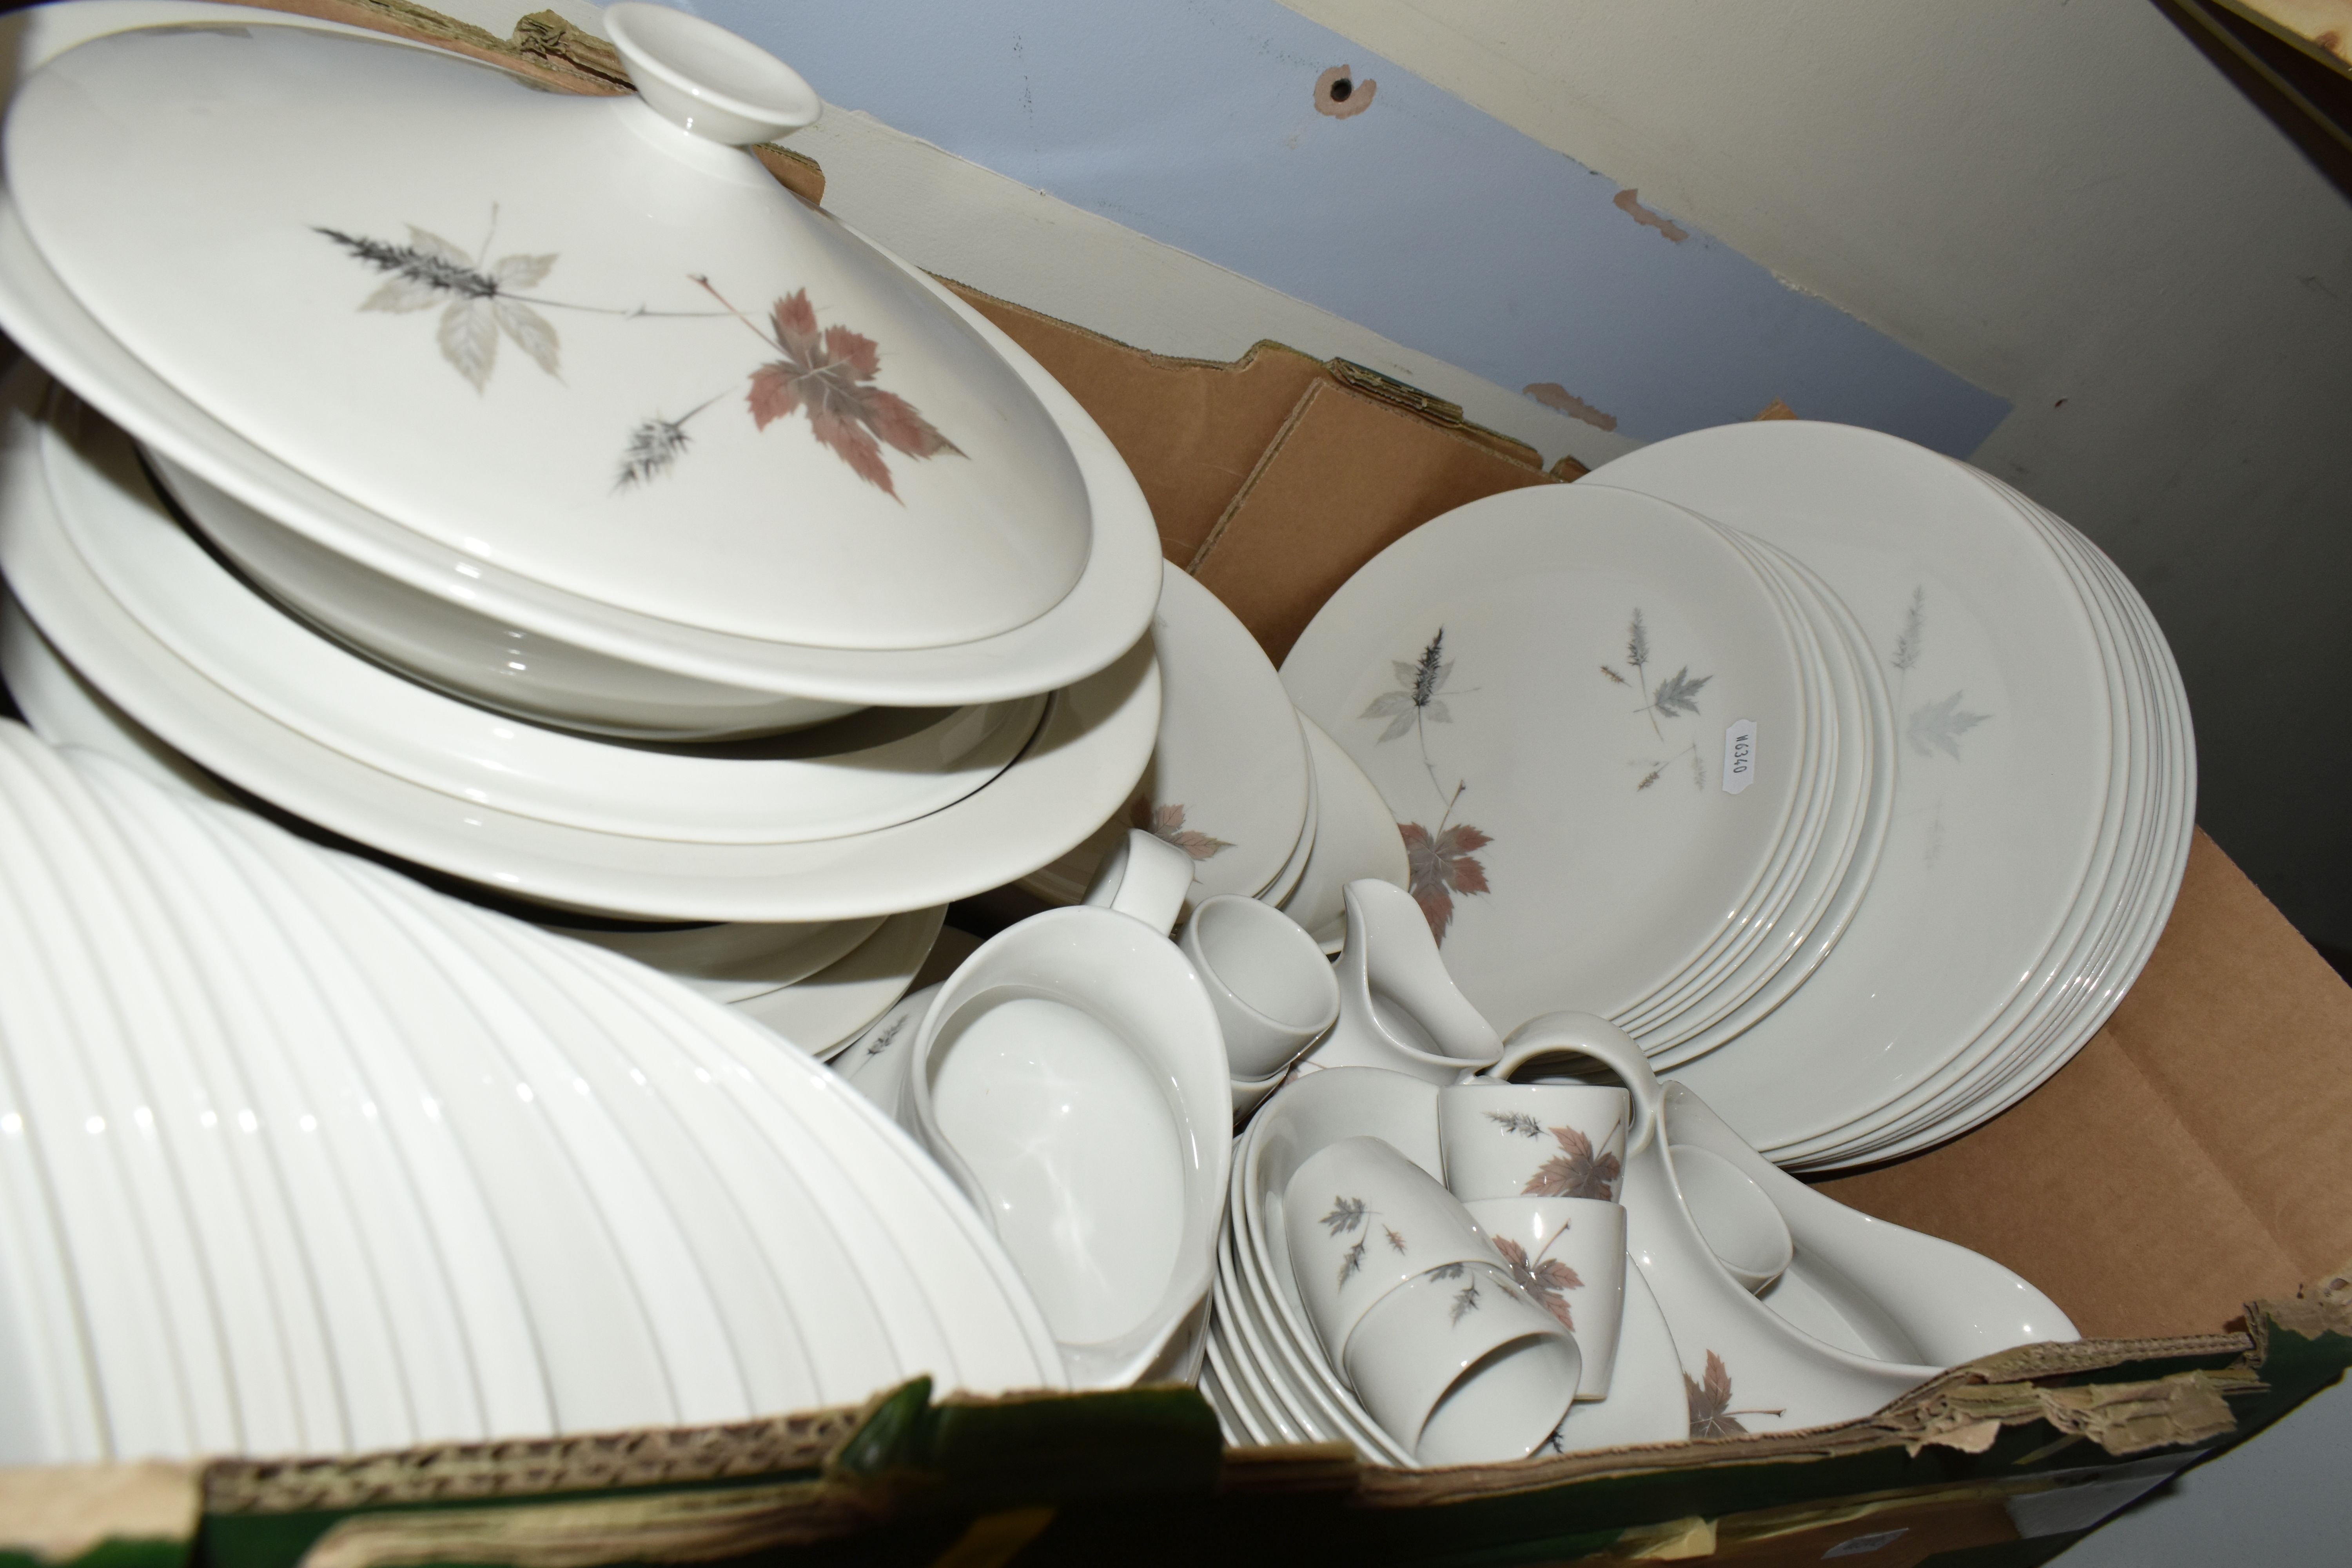 TWO BOXES AND LOOSE ROYAL DOULTON 'TUMBLING LEAVES' PATTERN DINNER SET, to include dinner plates, - Image 5 of 5